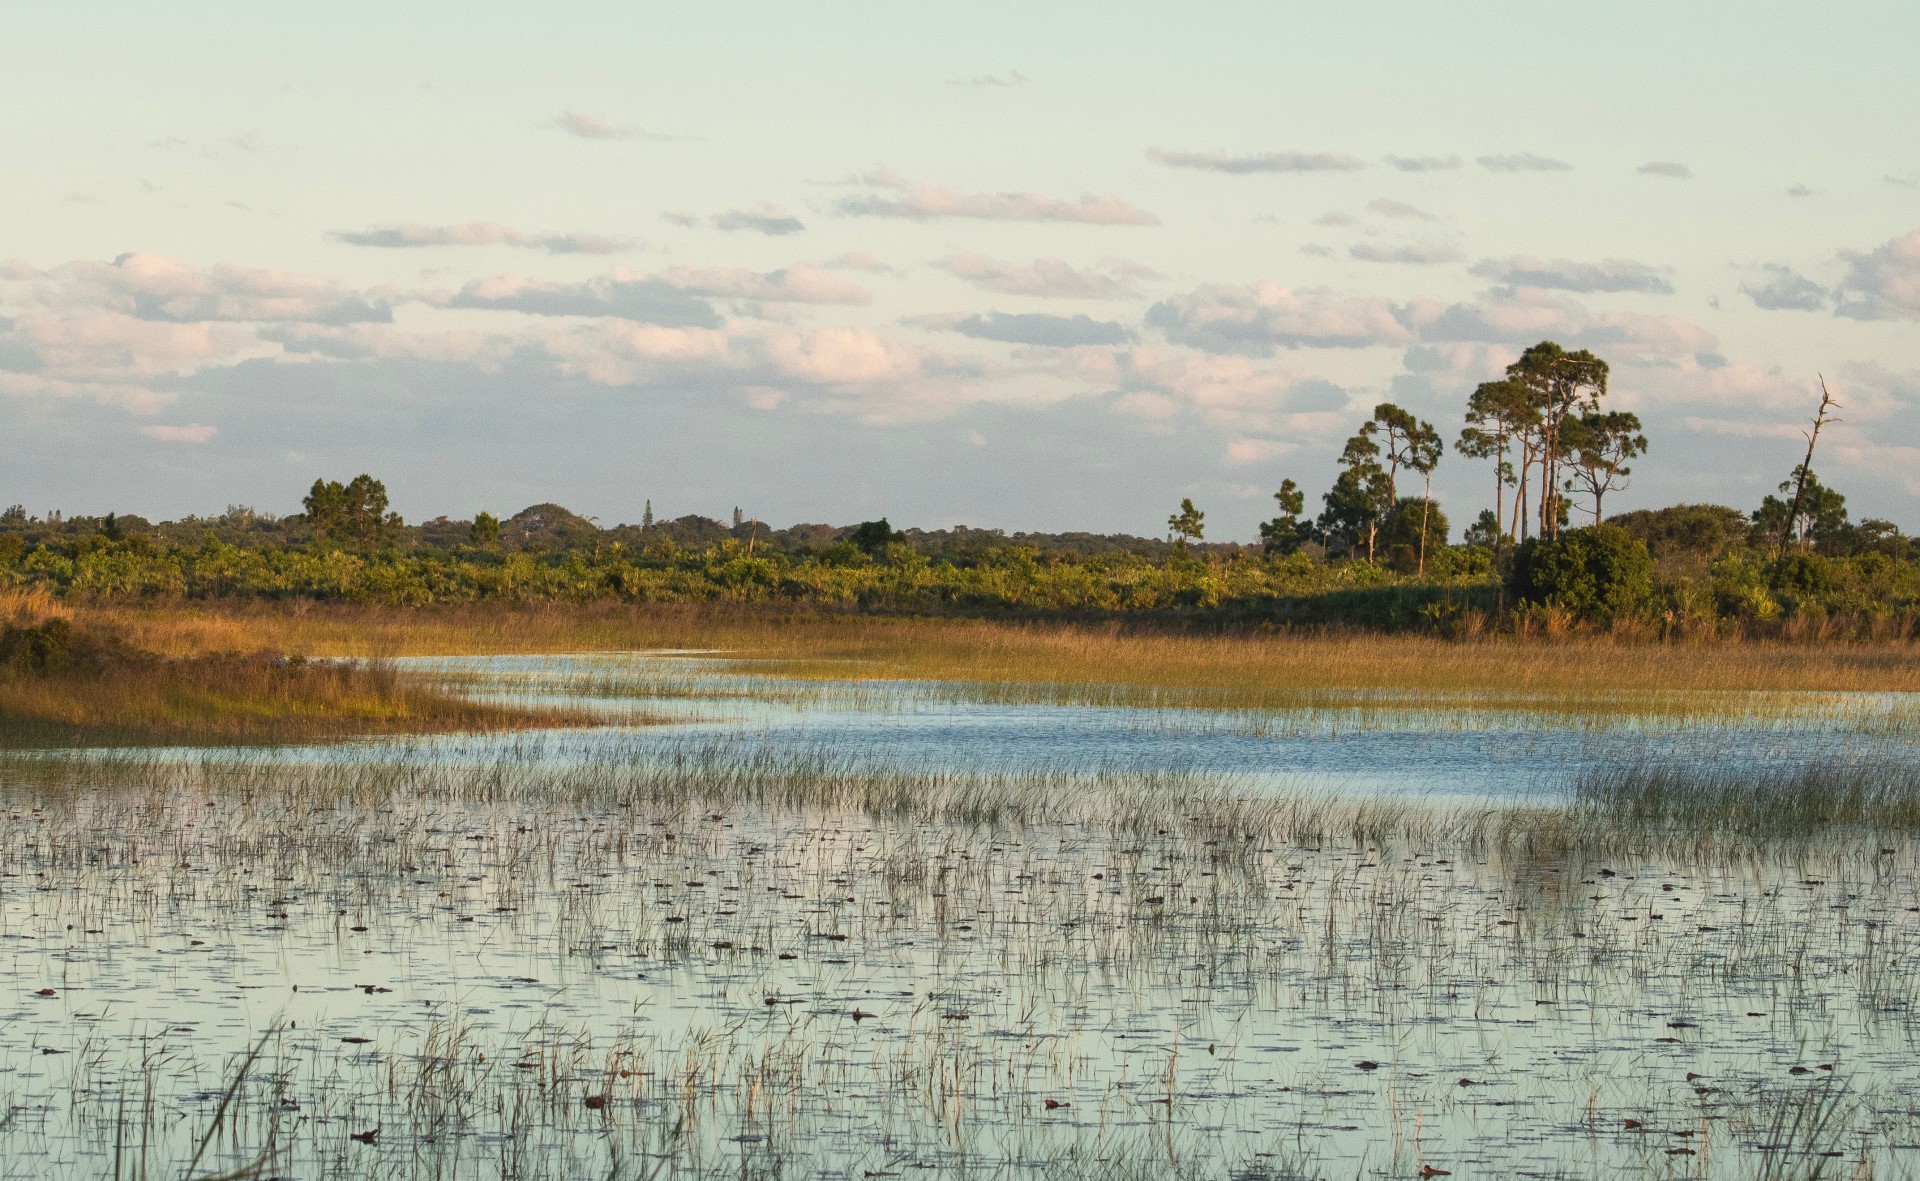 SPOTLIGHT on the Living Shorelines Act | The act seeks to mandate change to how we deal with coastal habitats and human development.